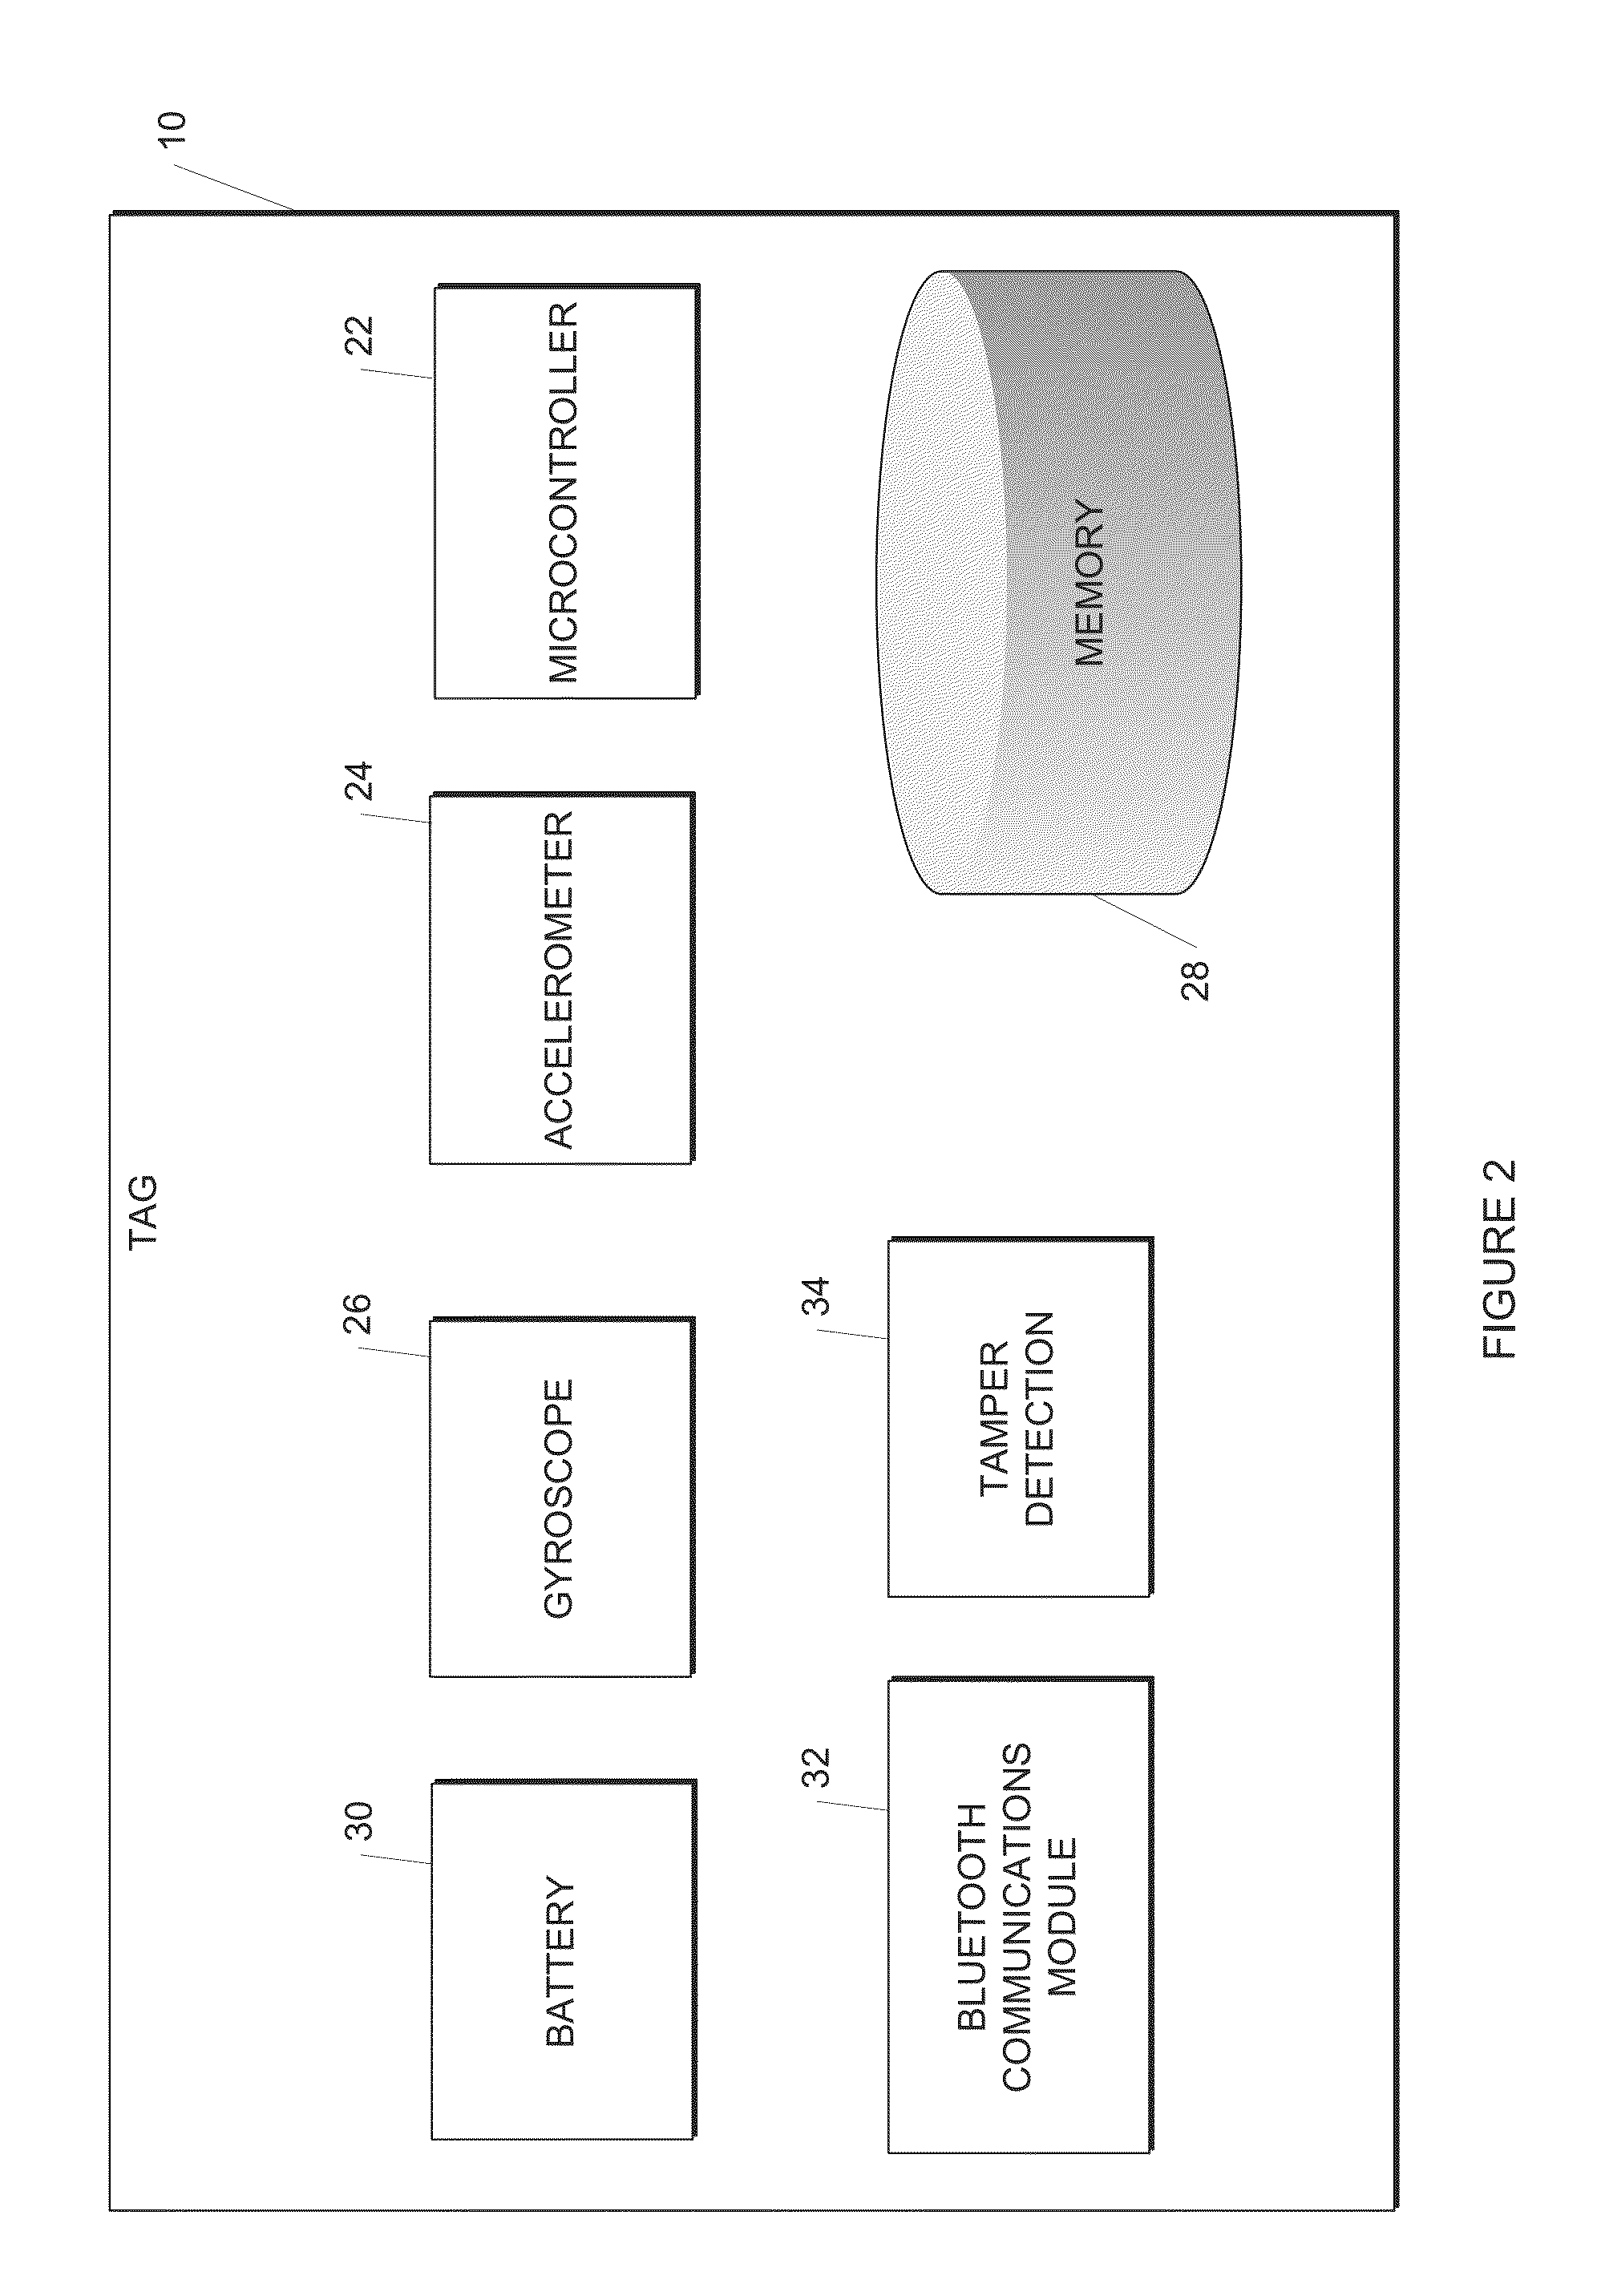 System and Method for Obtaining Vehicle Telematics Data